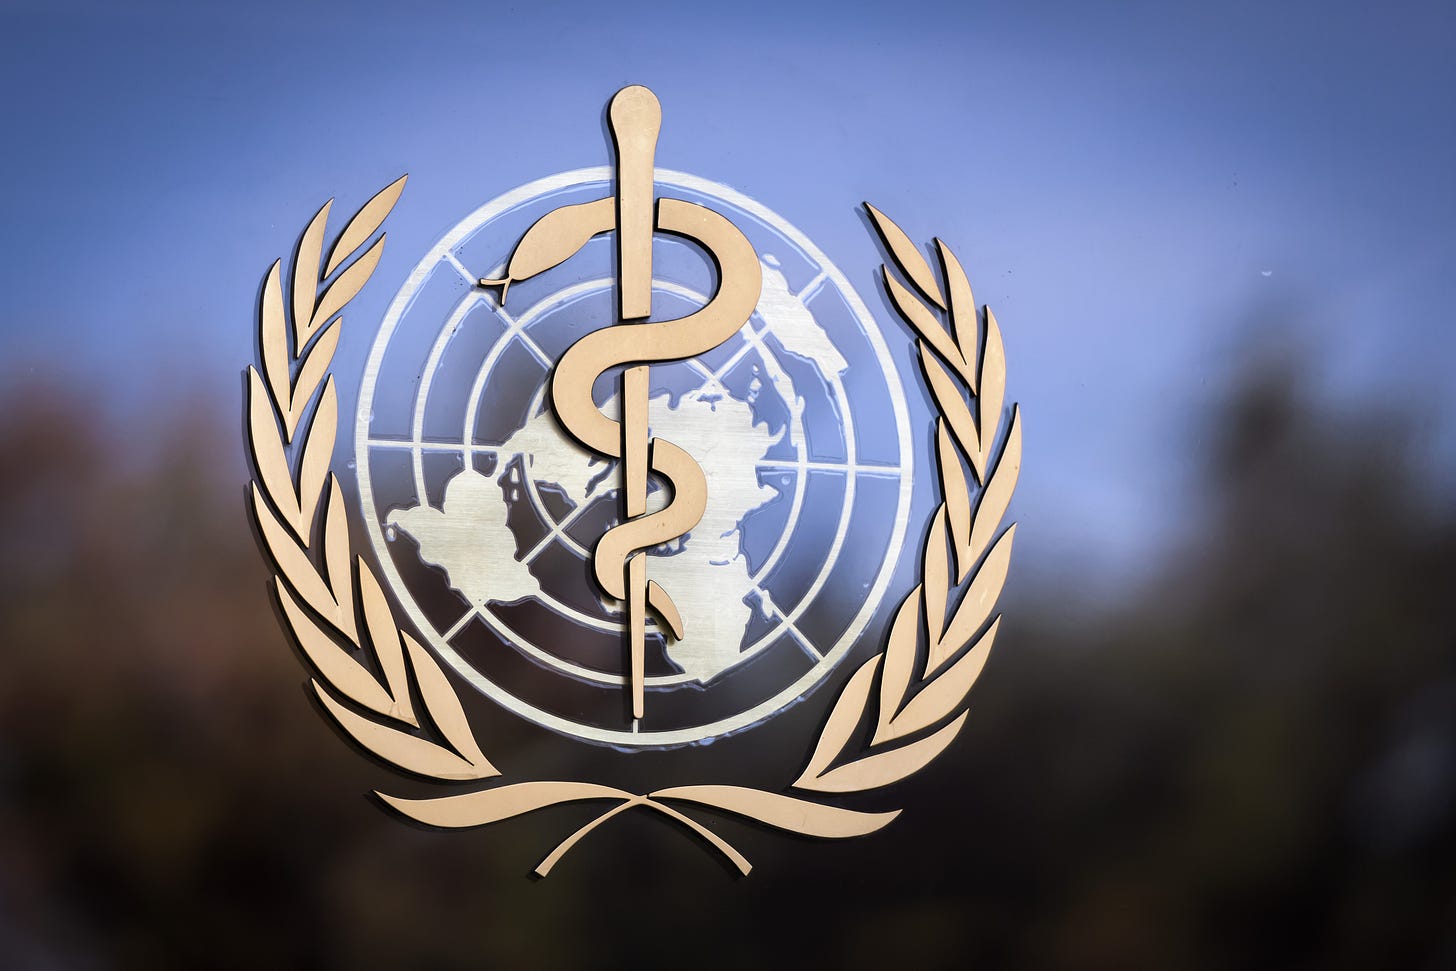 Cutting ties with the WHO endangers global public health - STAT